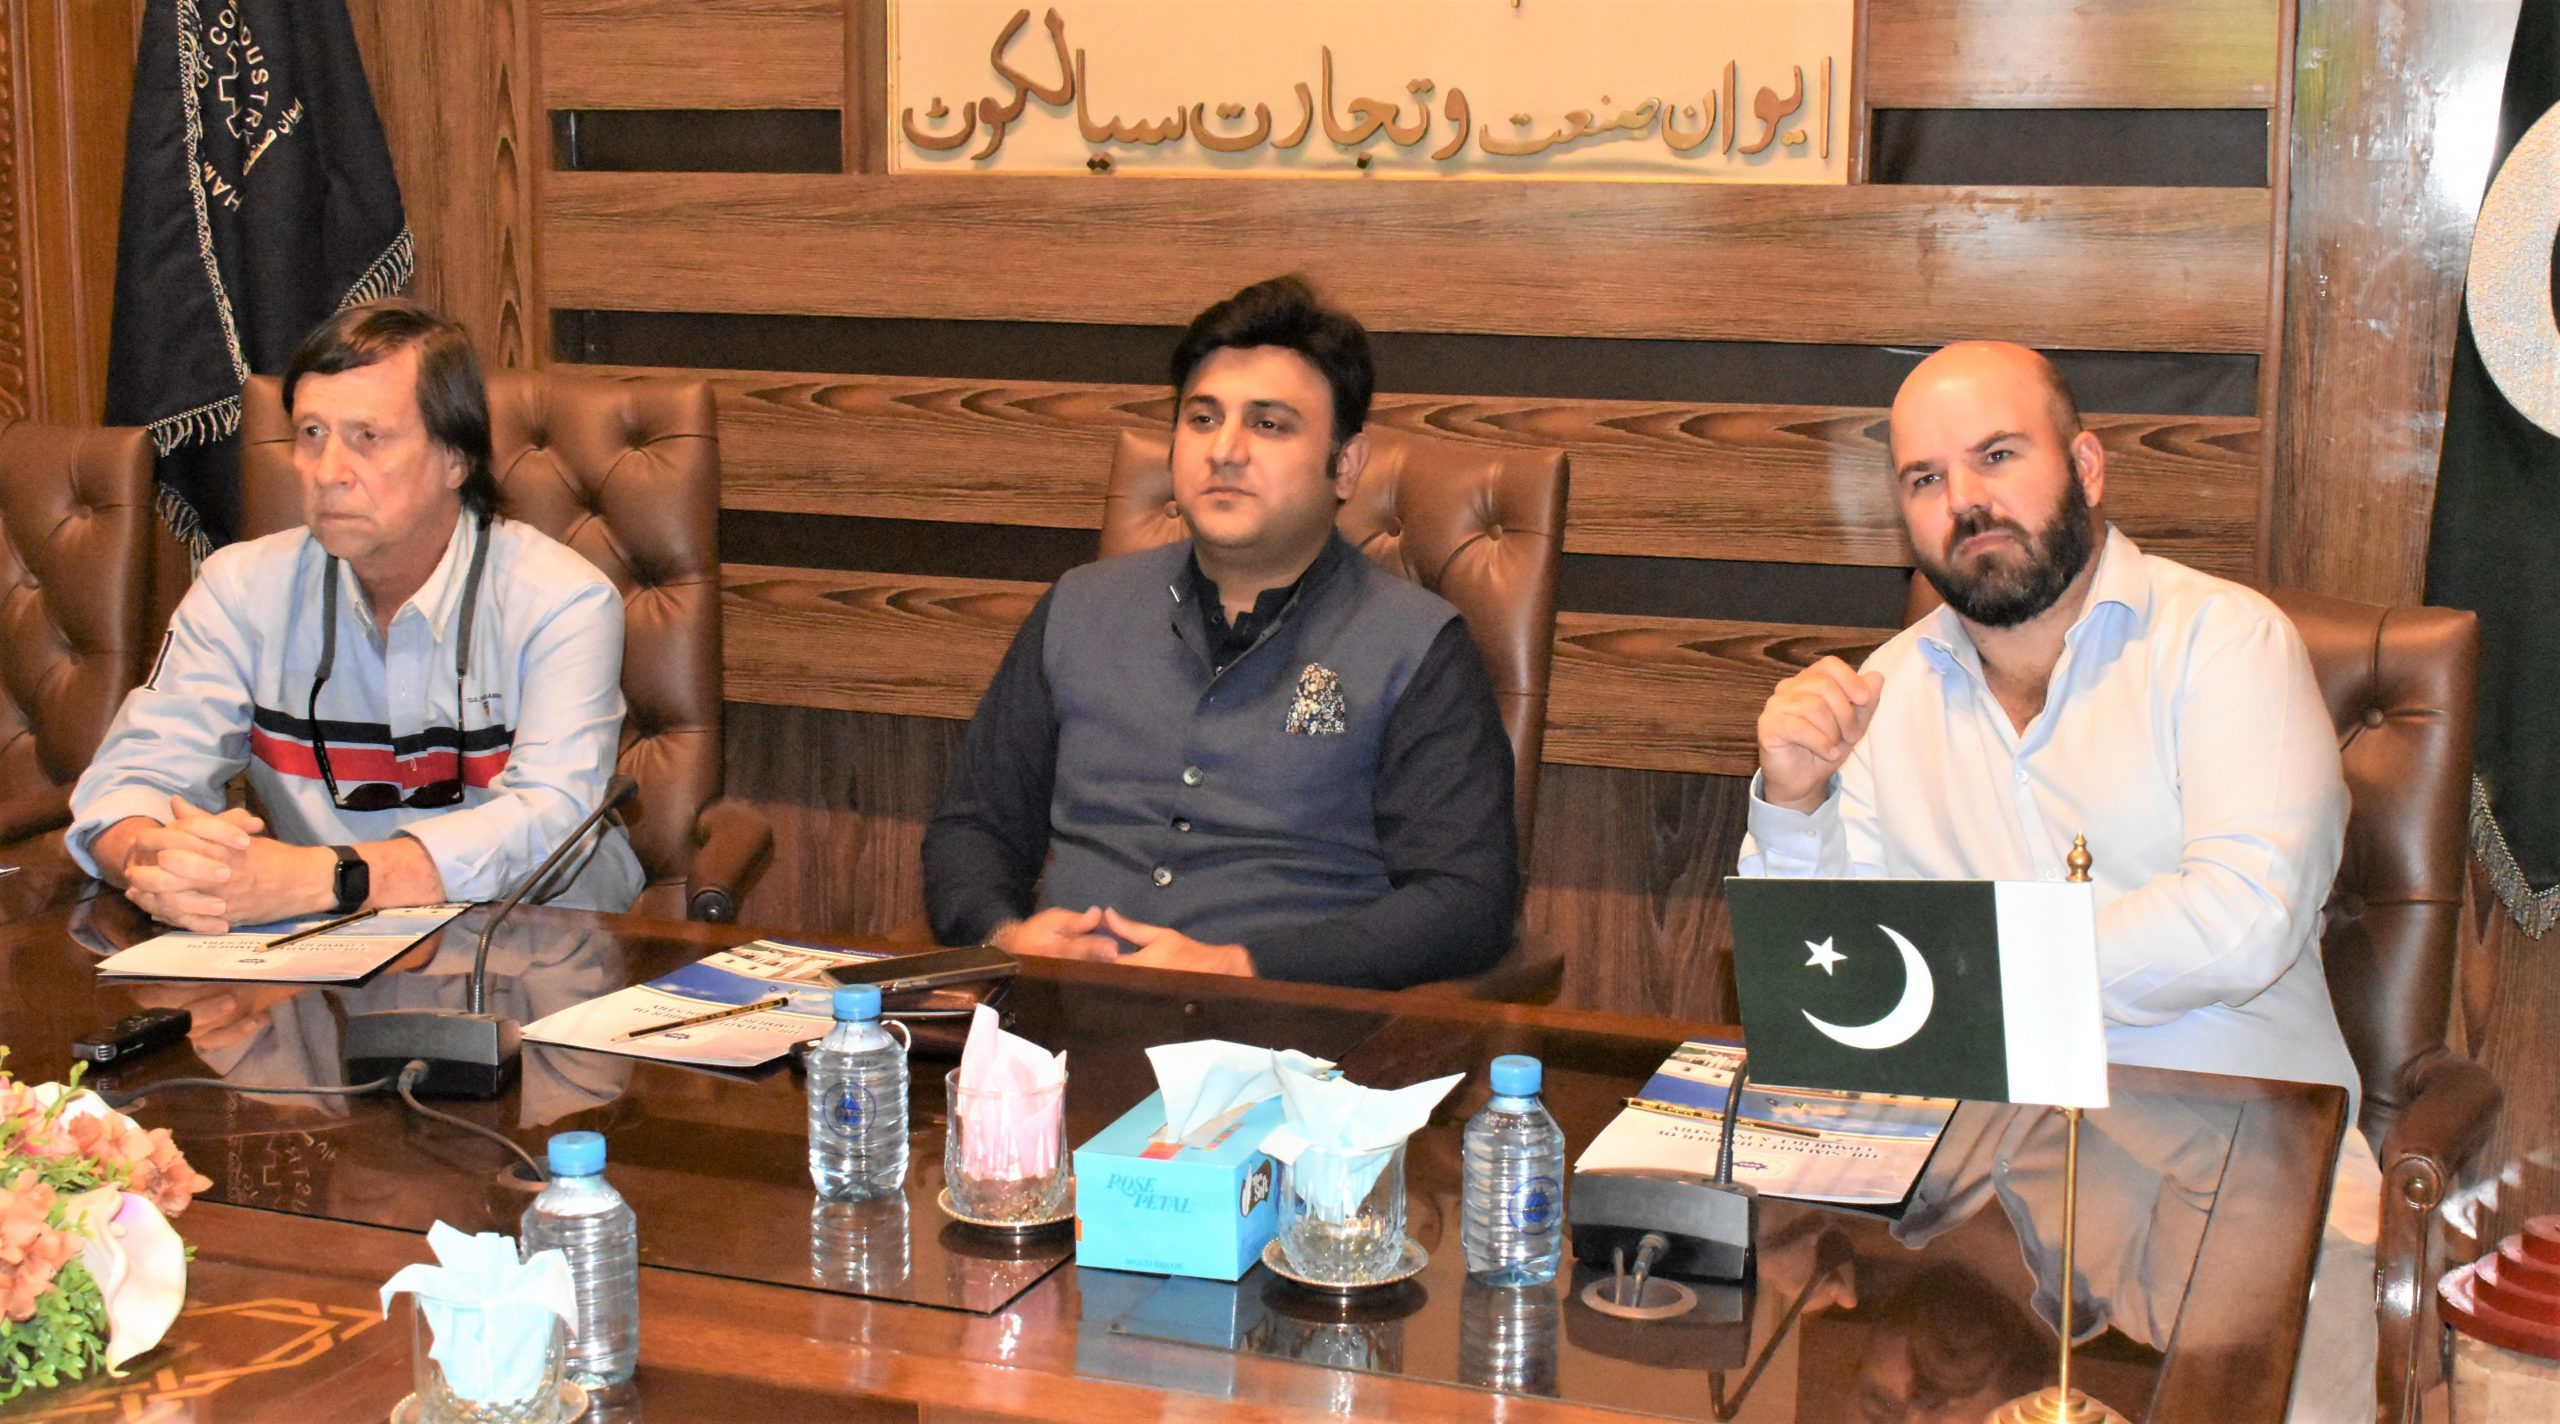 On May 24, 2022, Businessmen from Argentina visited The Sialkot Chamber of Commerce & Industry for an interactive session with sports goods manufacturers.